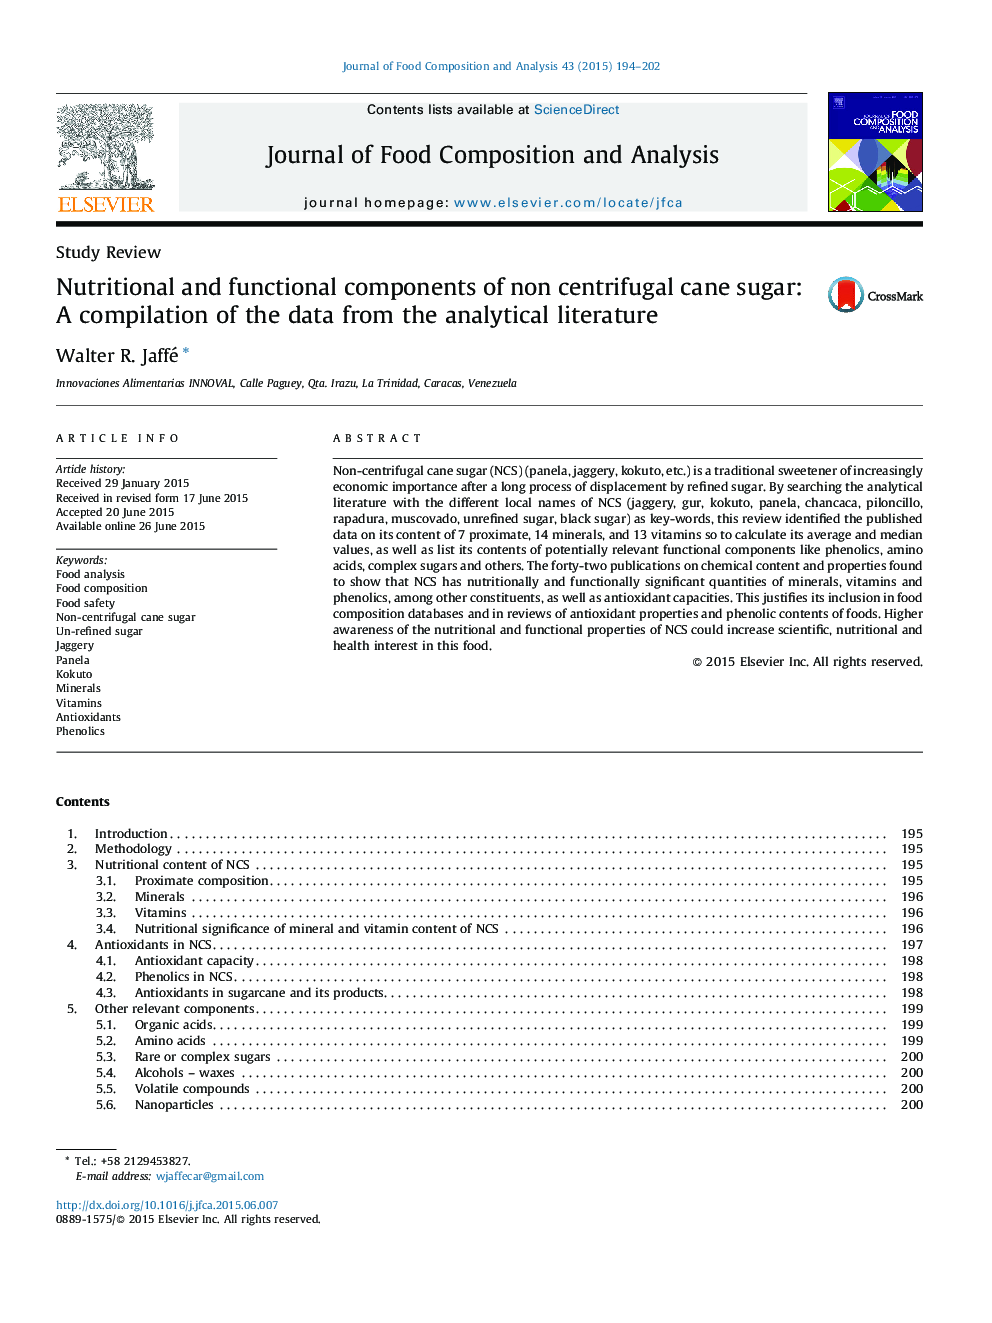 Nutritional and functional components of non centrifugal cane sugar: A compilation of the data from the analytical literature